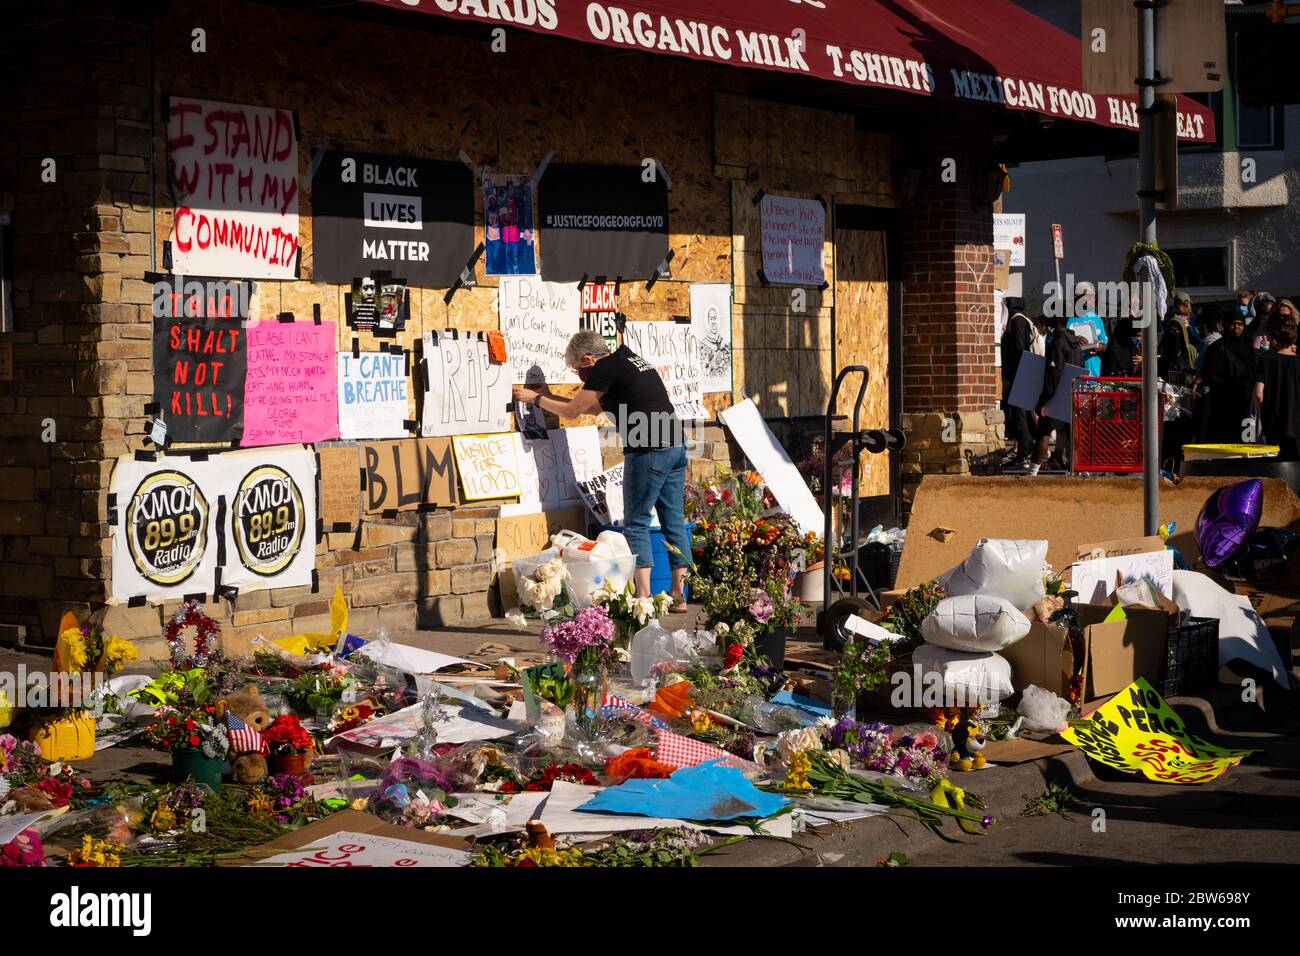 cup foods george floyd memorial honoring black lives matter in minneapolis riots white woman black lives matter posting sign Stock Photo